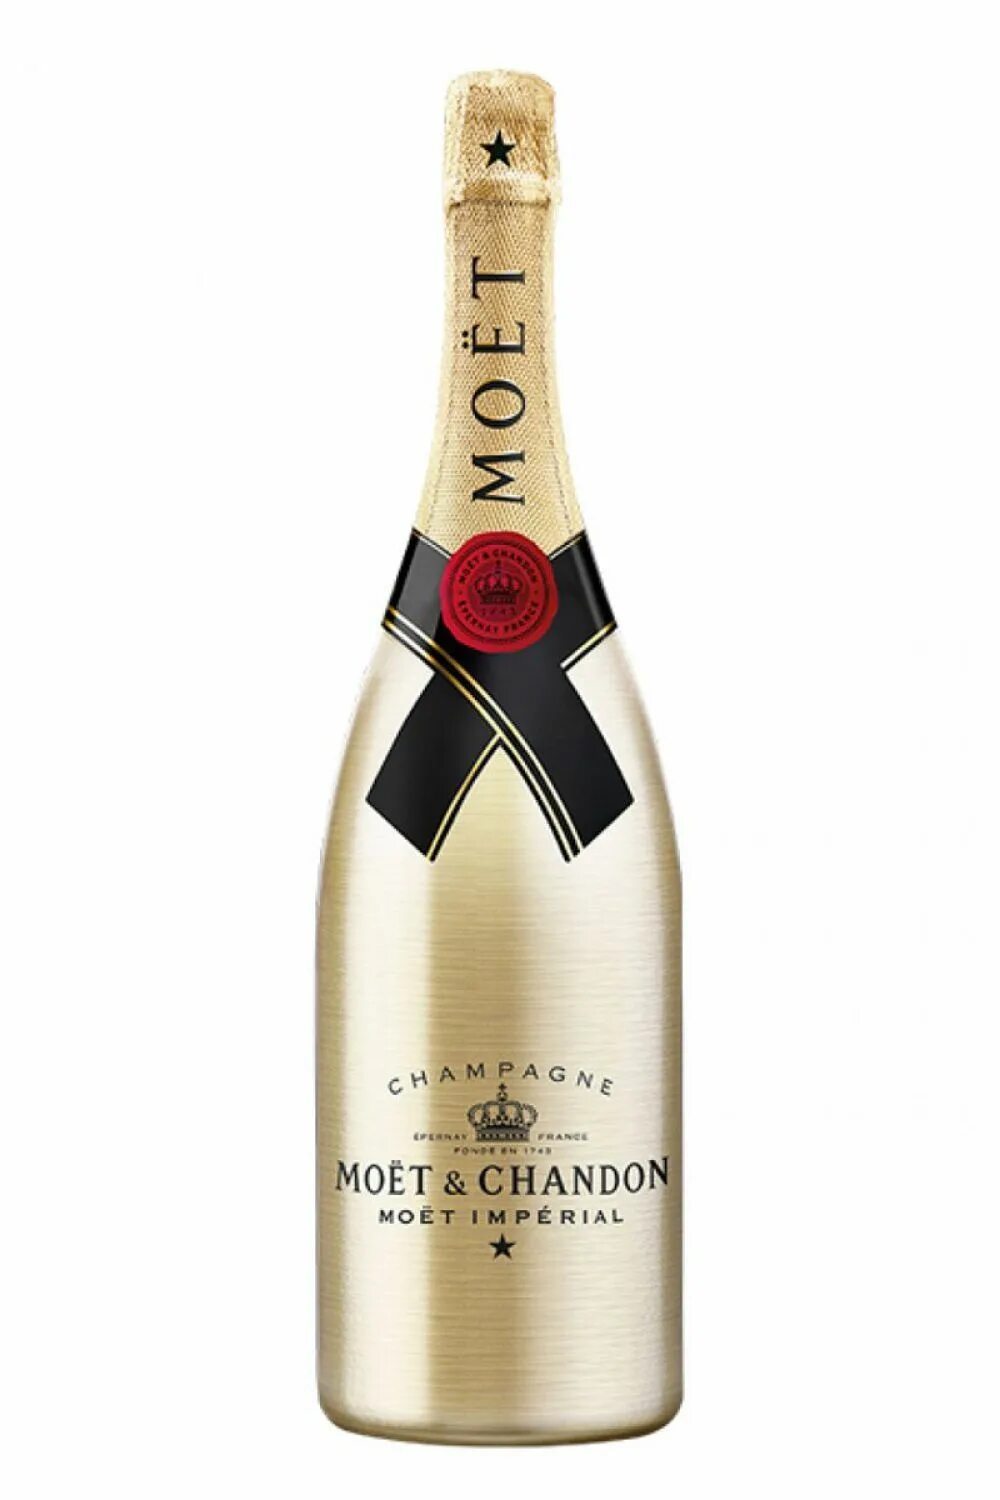 Вино оскар. Moet Chandon Gold Imperial. Moet & Chandon Brut 70 CL + 2 Gold Glasses. Шампанское moet & Chandon Ice Imperial 0,75 л. Бутылка Оскар.